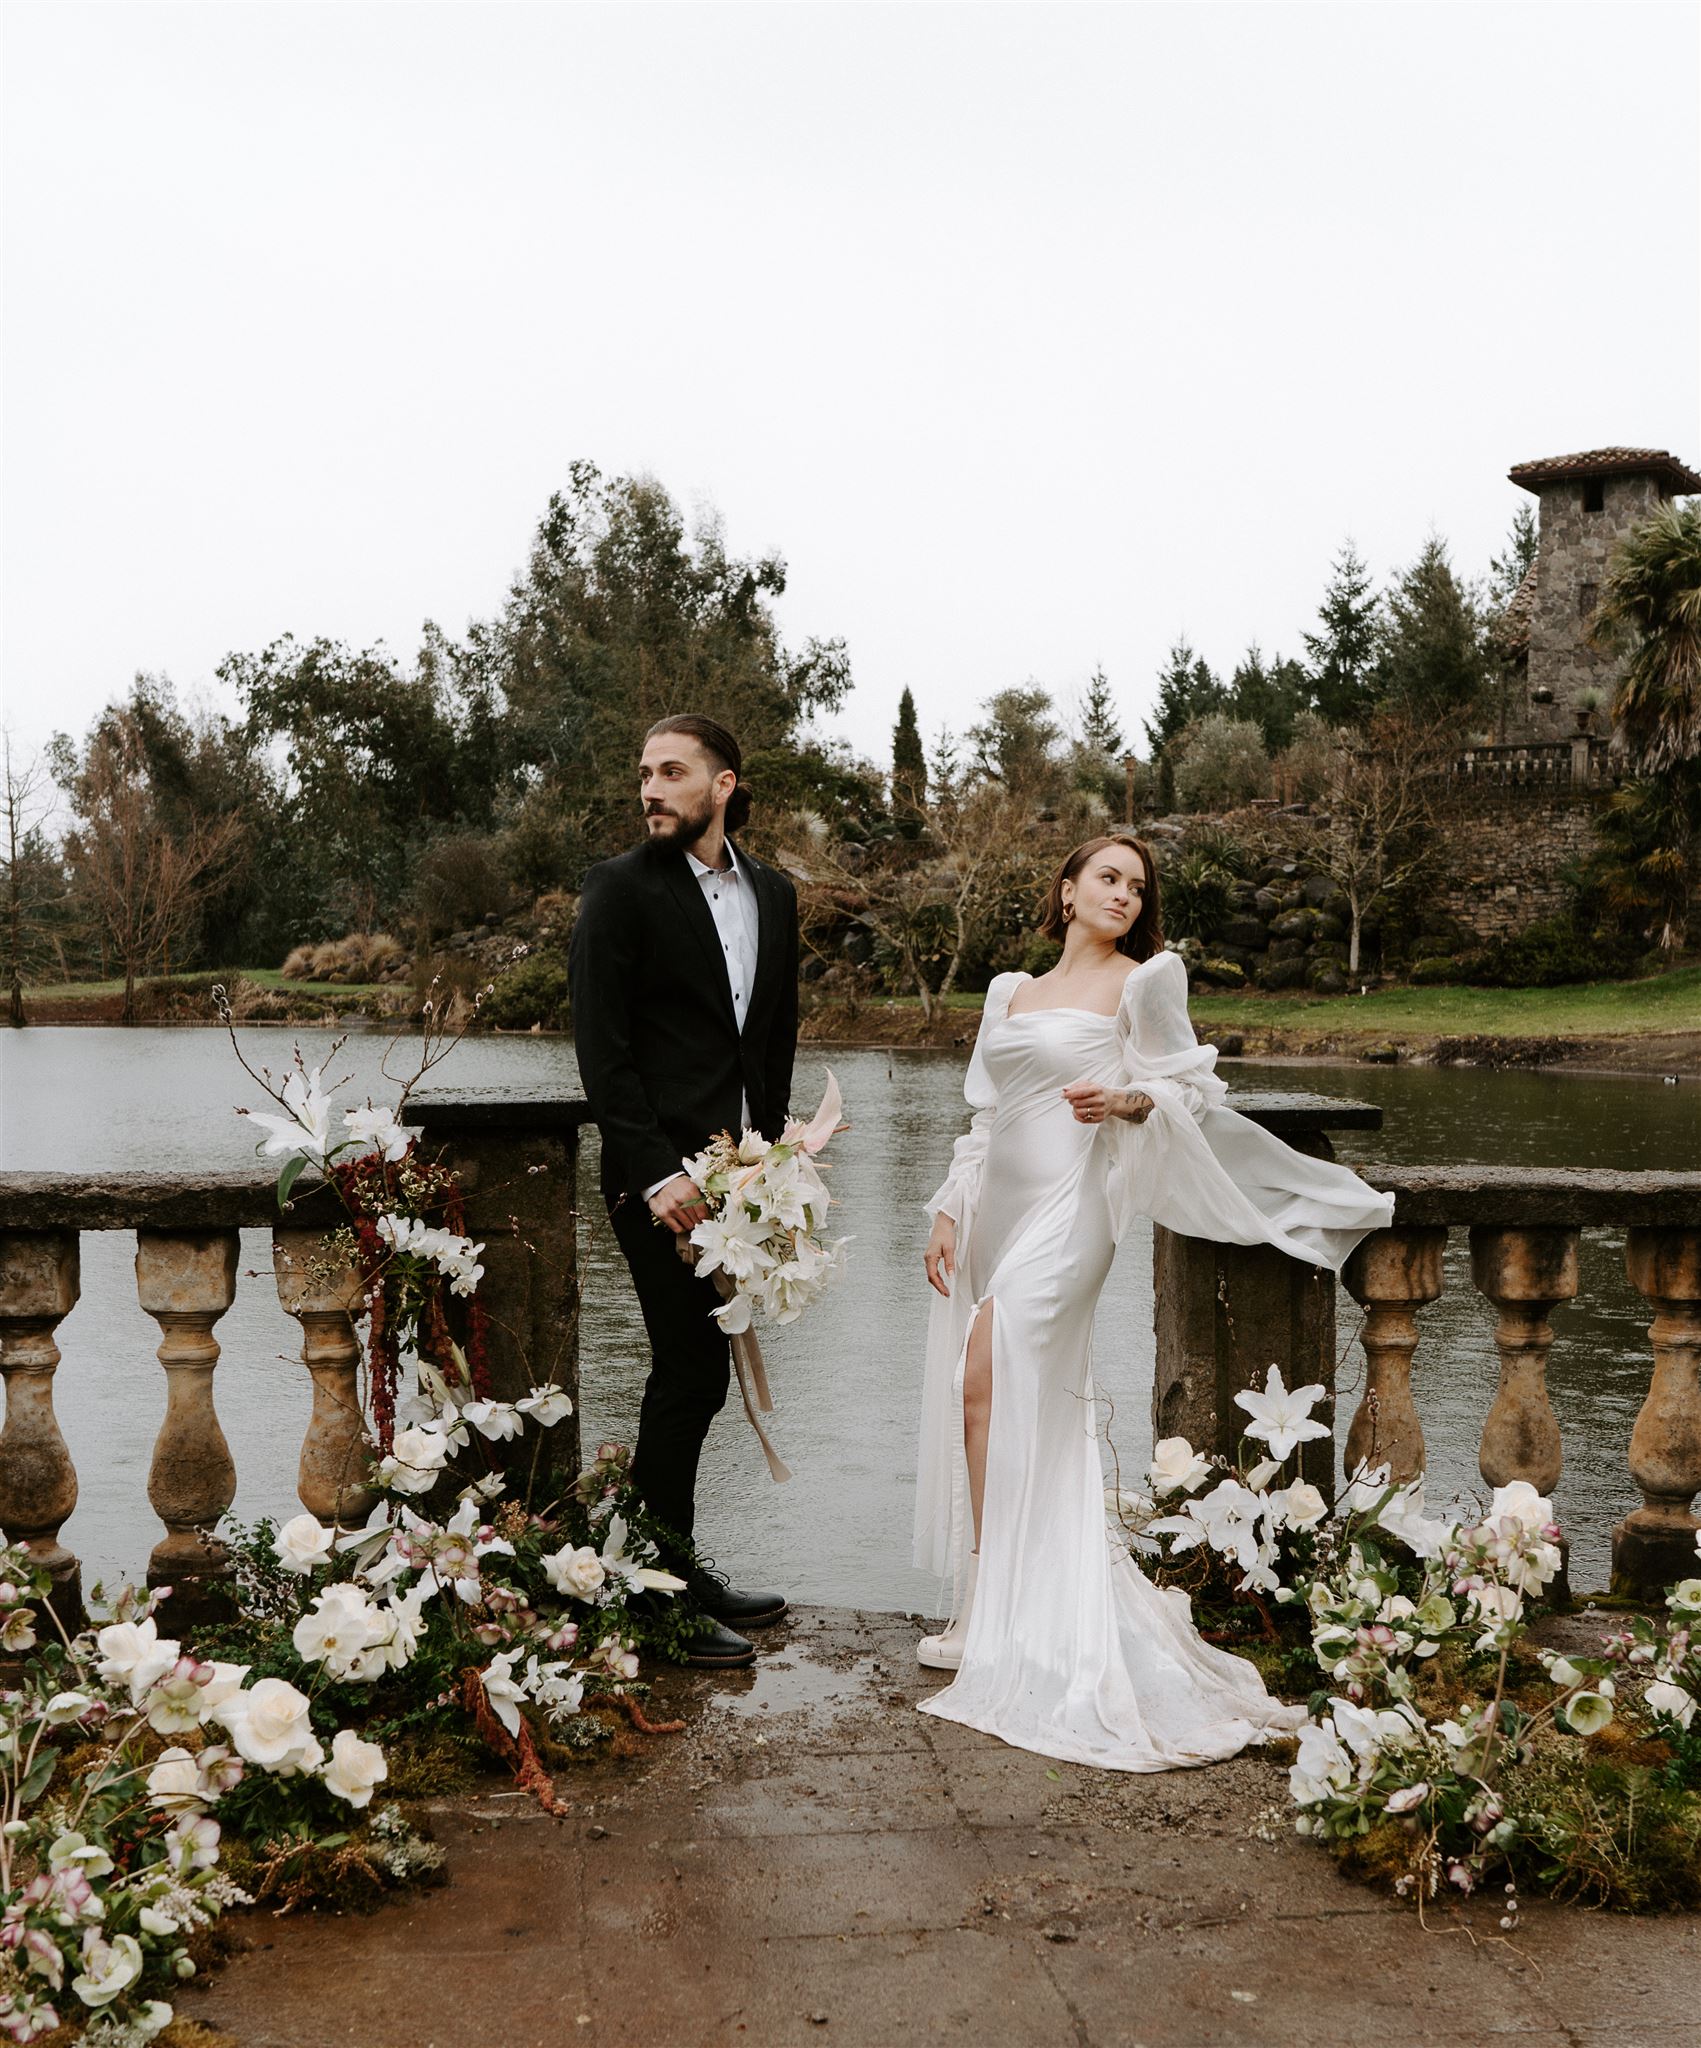 Oregon elopement at a winery